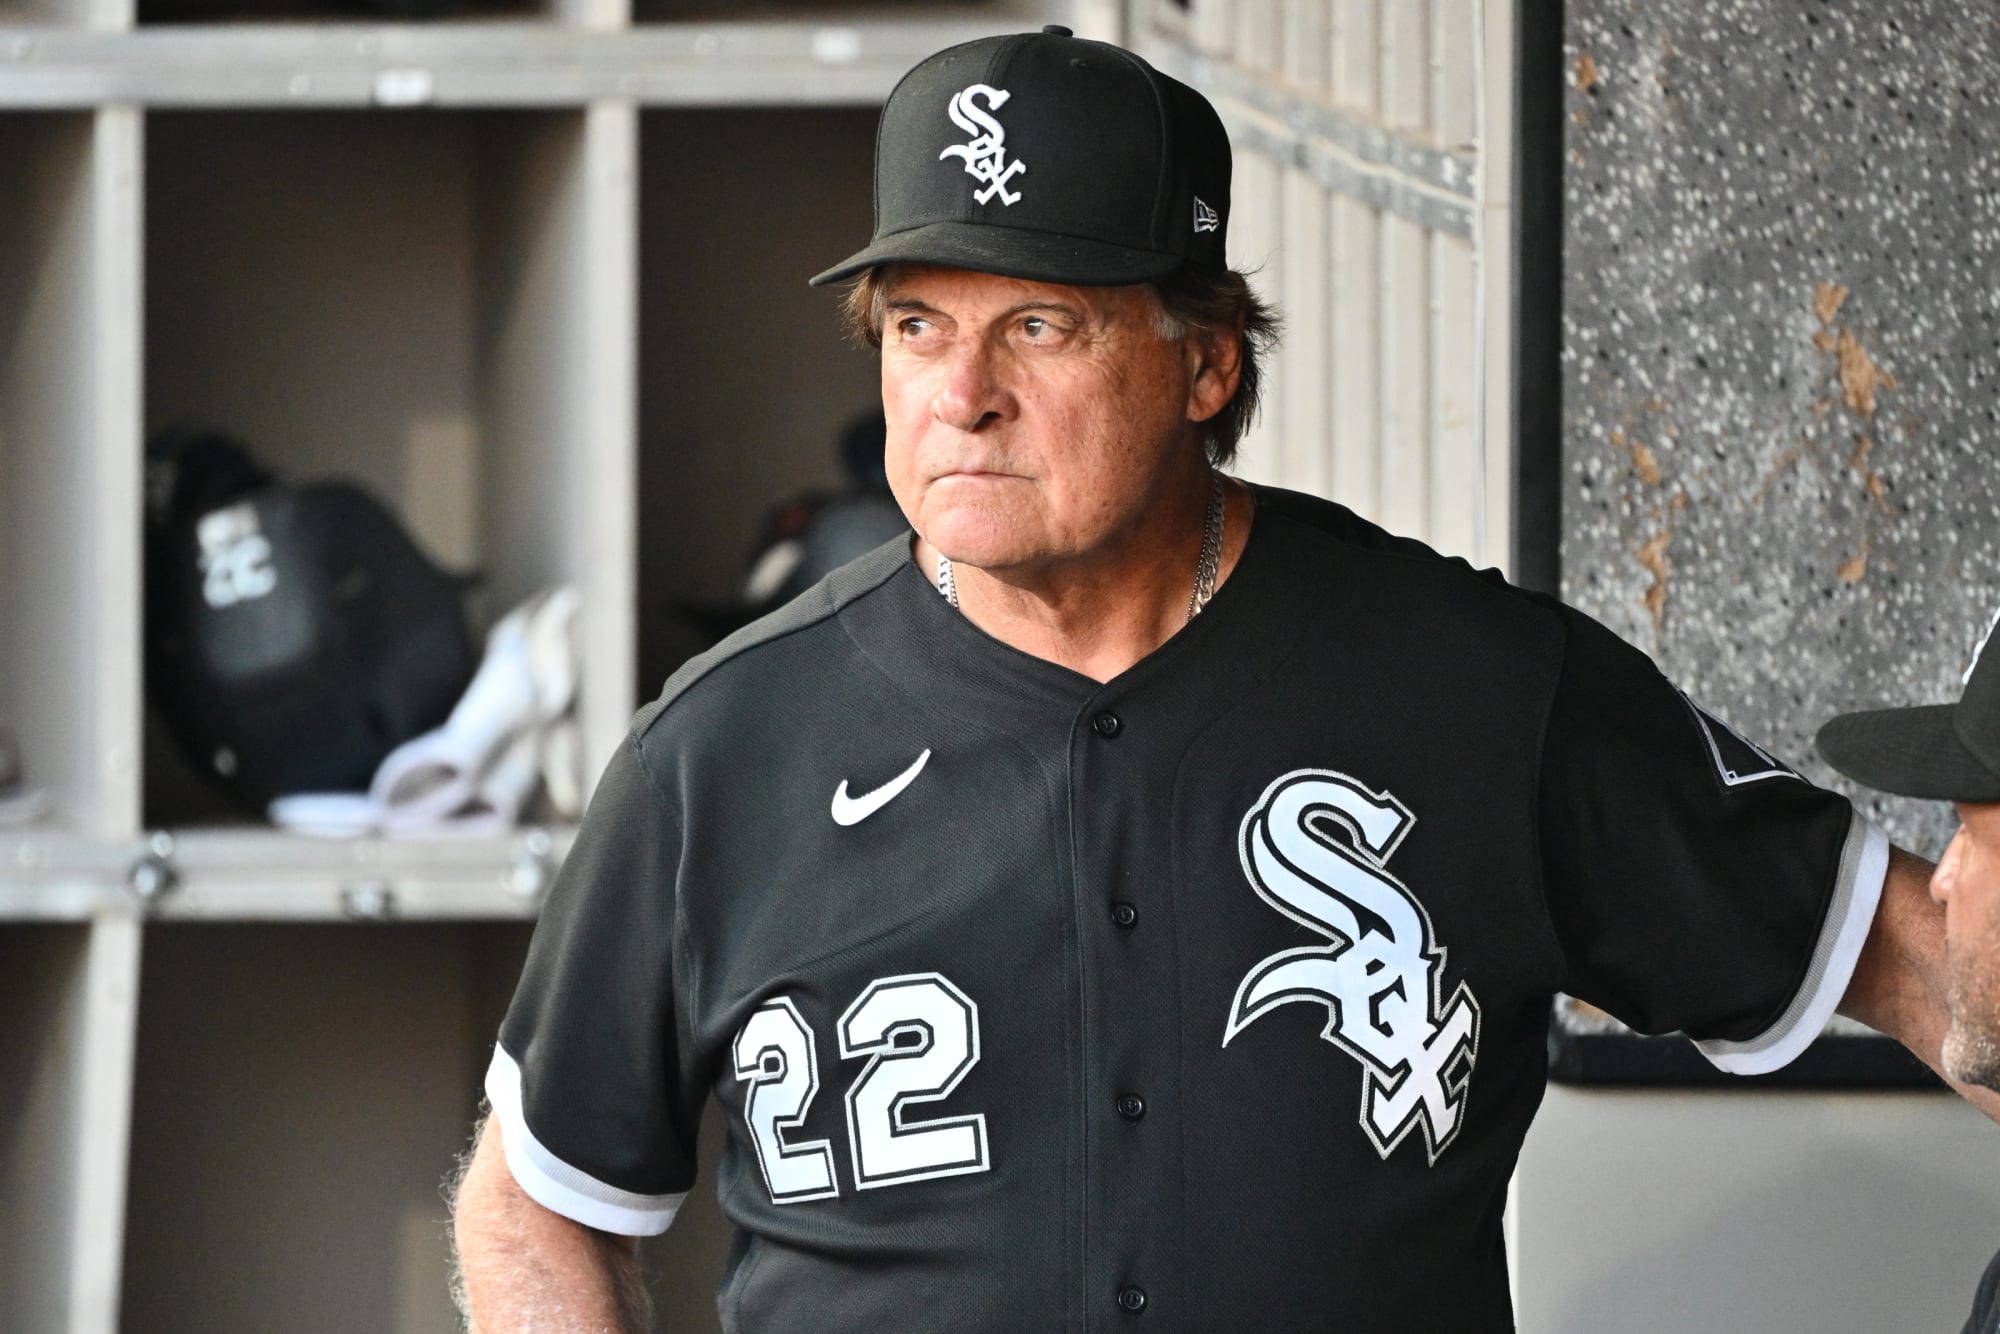 White Sox flawed Tony La Russa experiment ends exactly how we thought it would